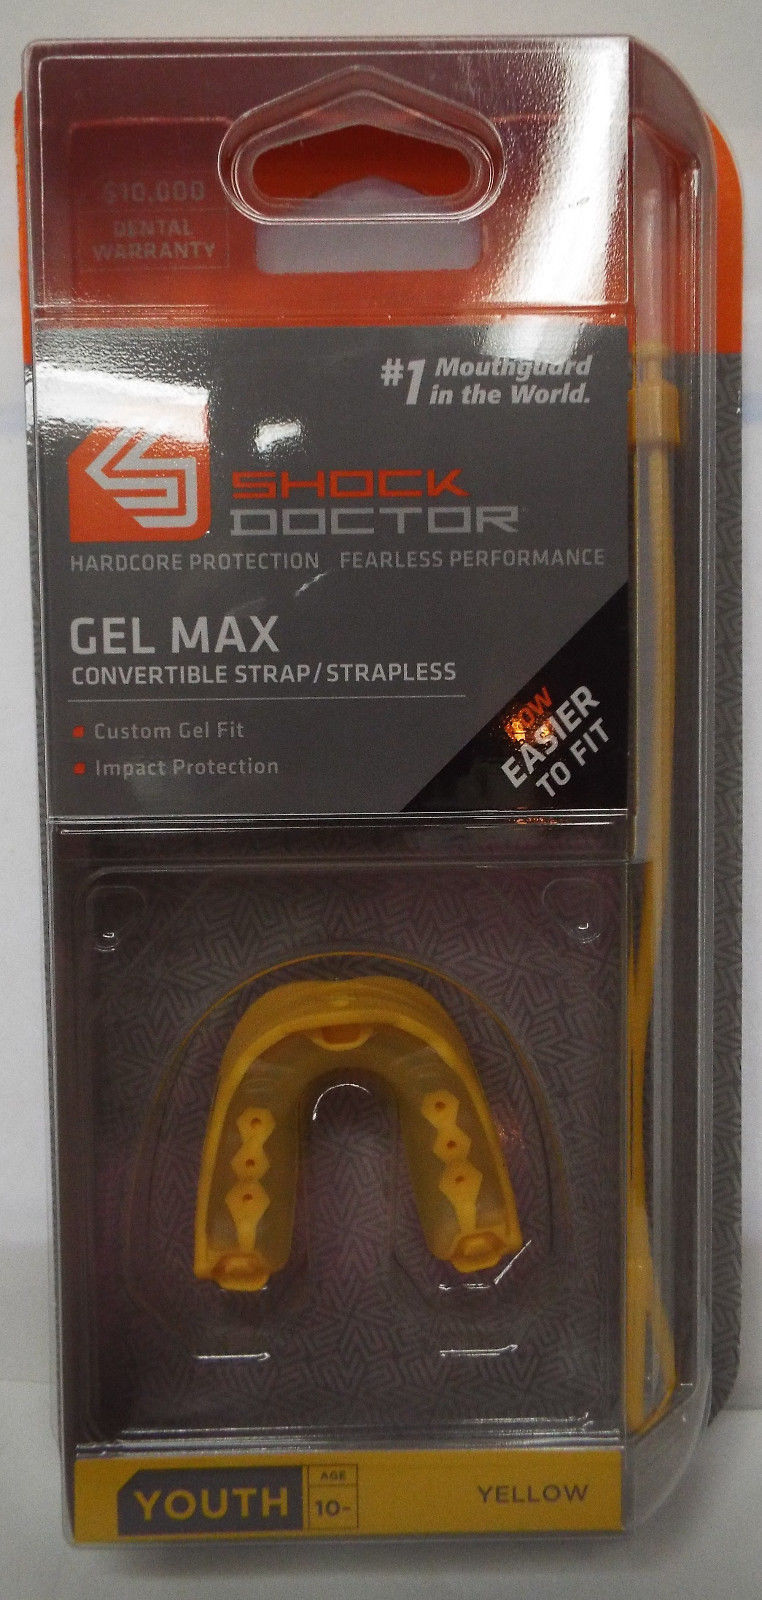 Shock Doctor Gel Max Convertible Strap / Strapless Youth 10- in Yellow NIP